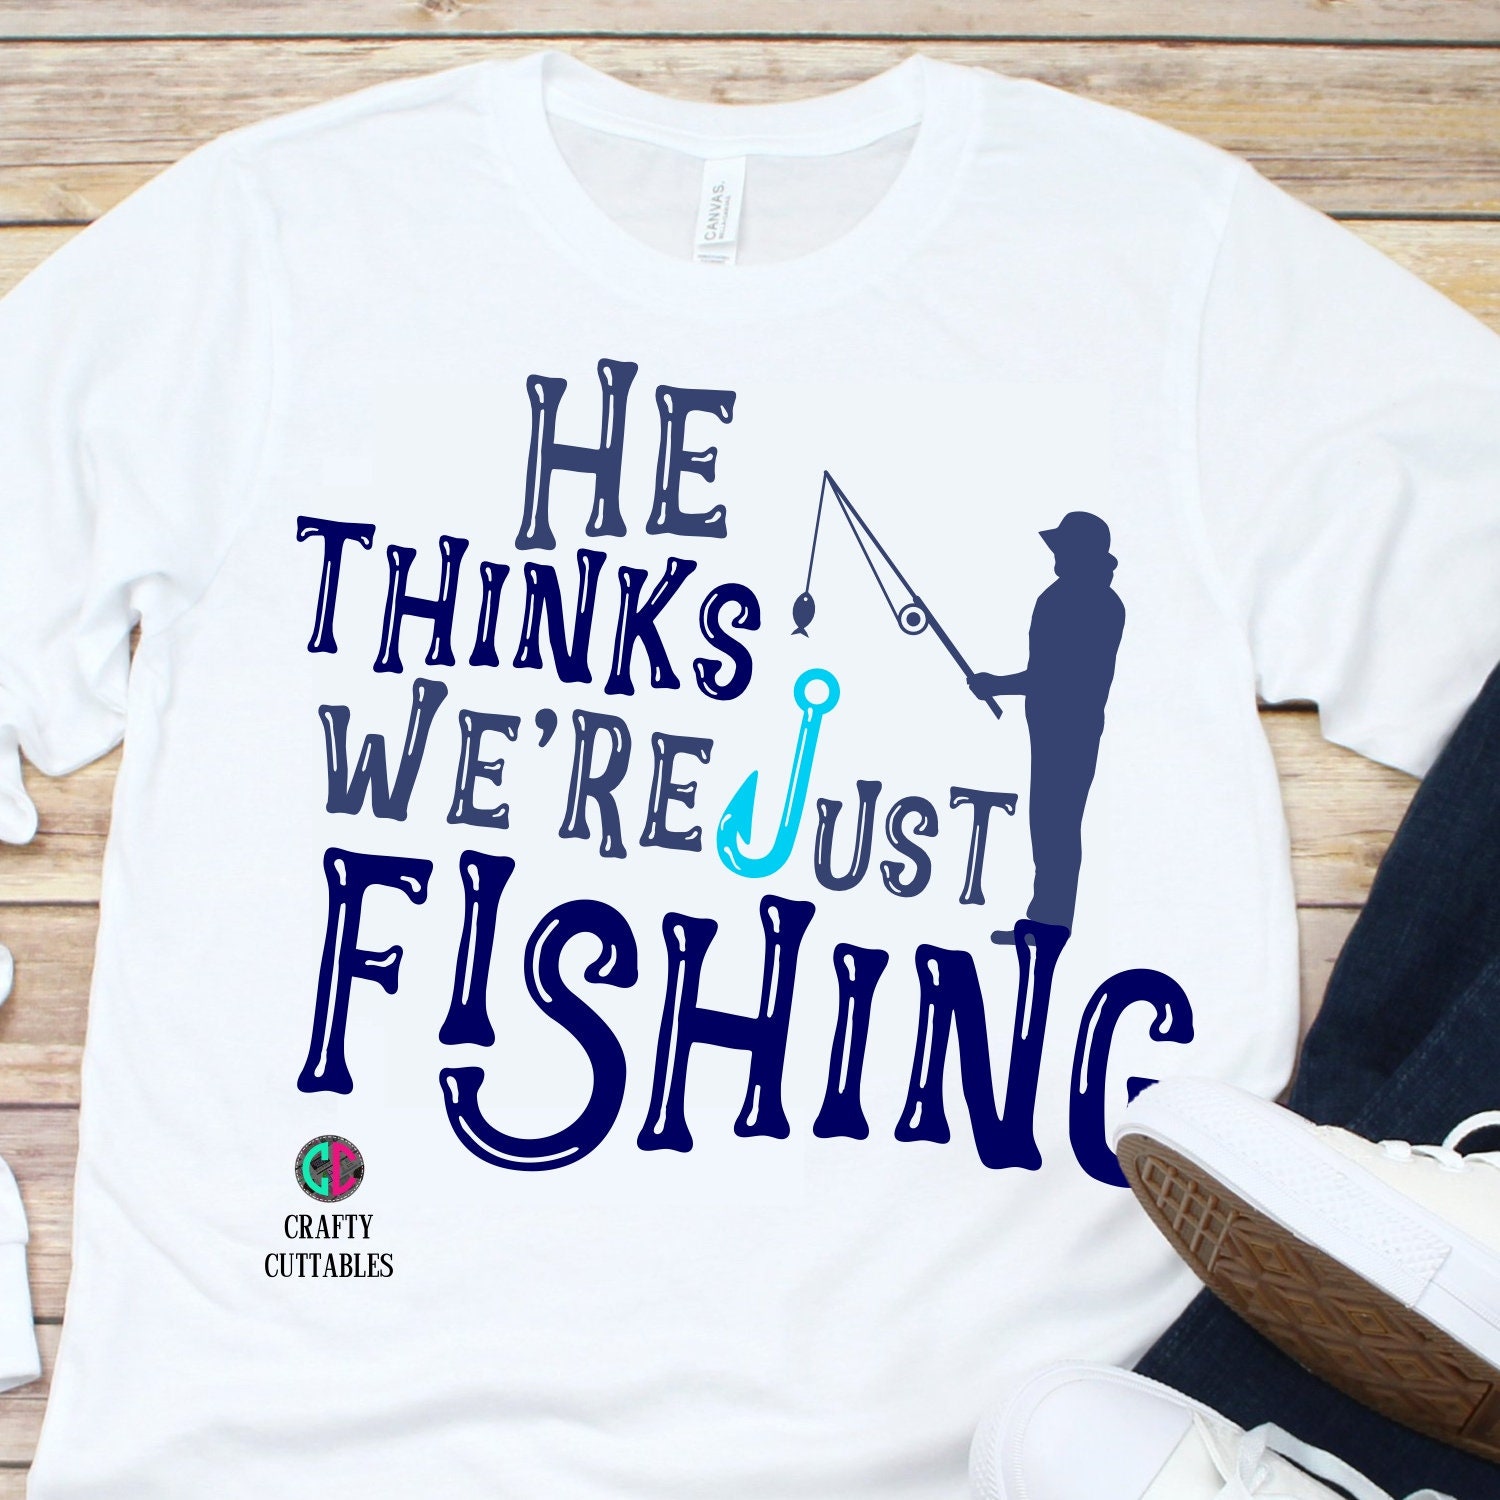 Download He thinks we're just fishing svg,just fishing svg,fathers day svg,fathers day,fathers day gift ...